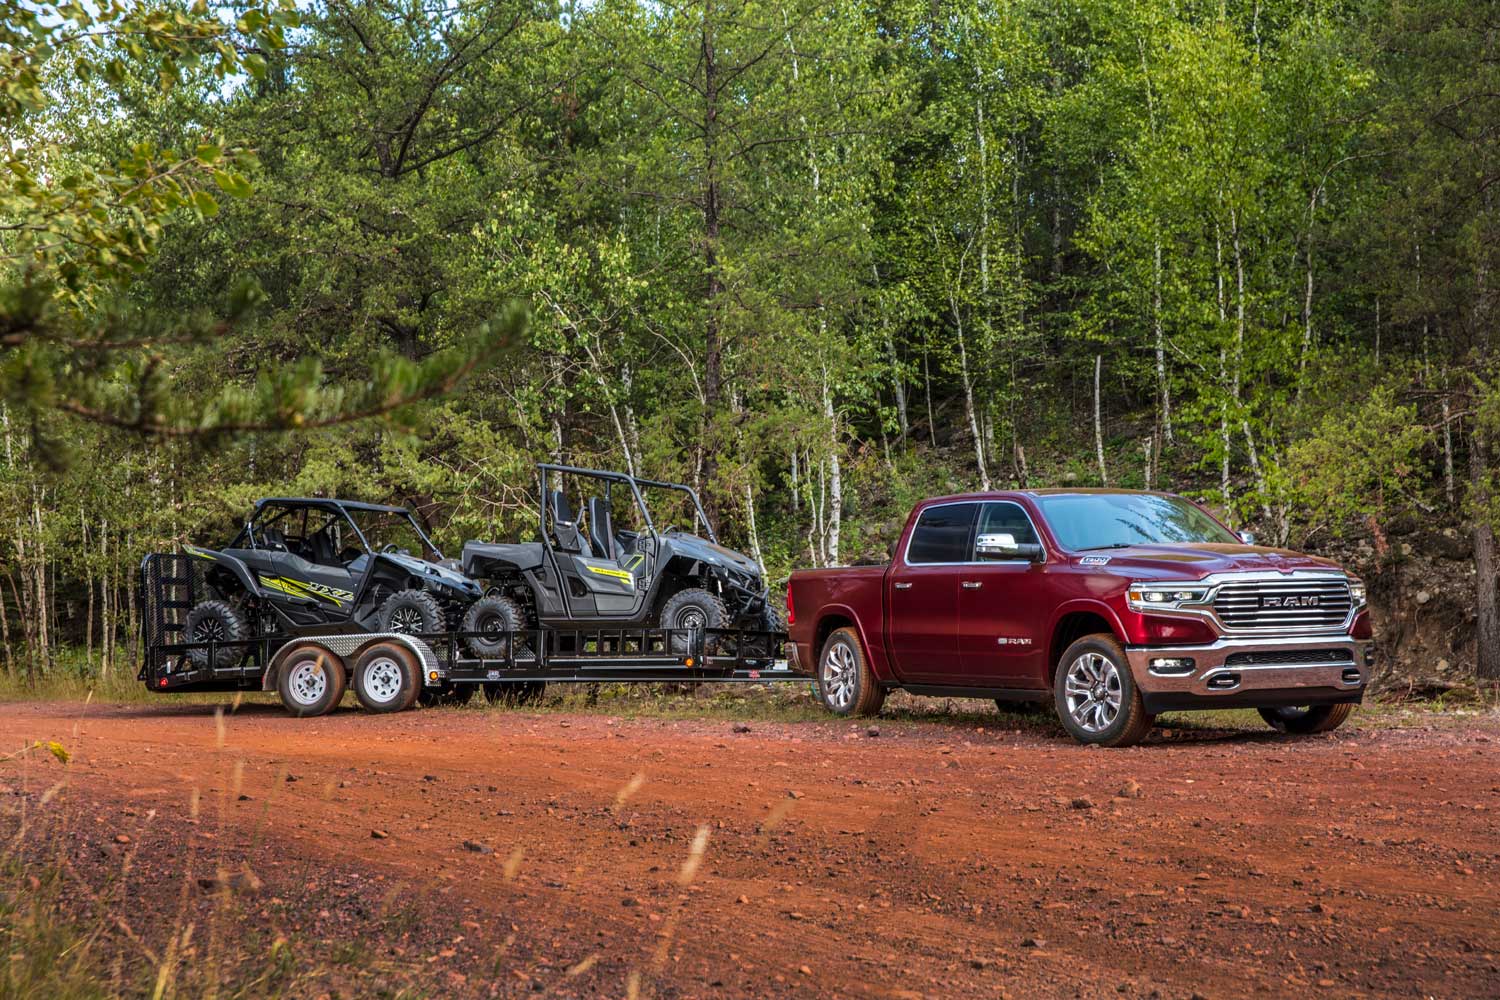 2023 Ram 1500 in red towing trailer with two off-road vehicles (side-by-sides) loaded